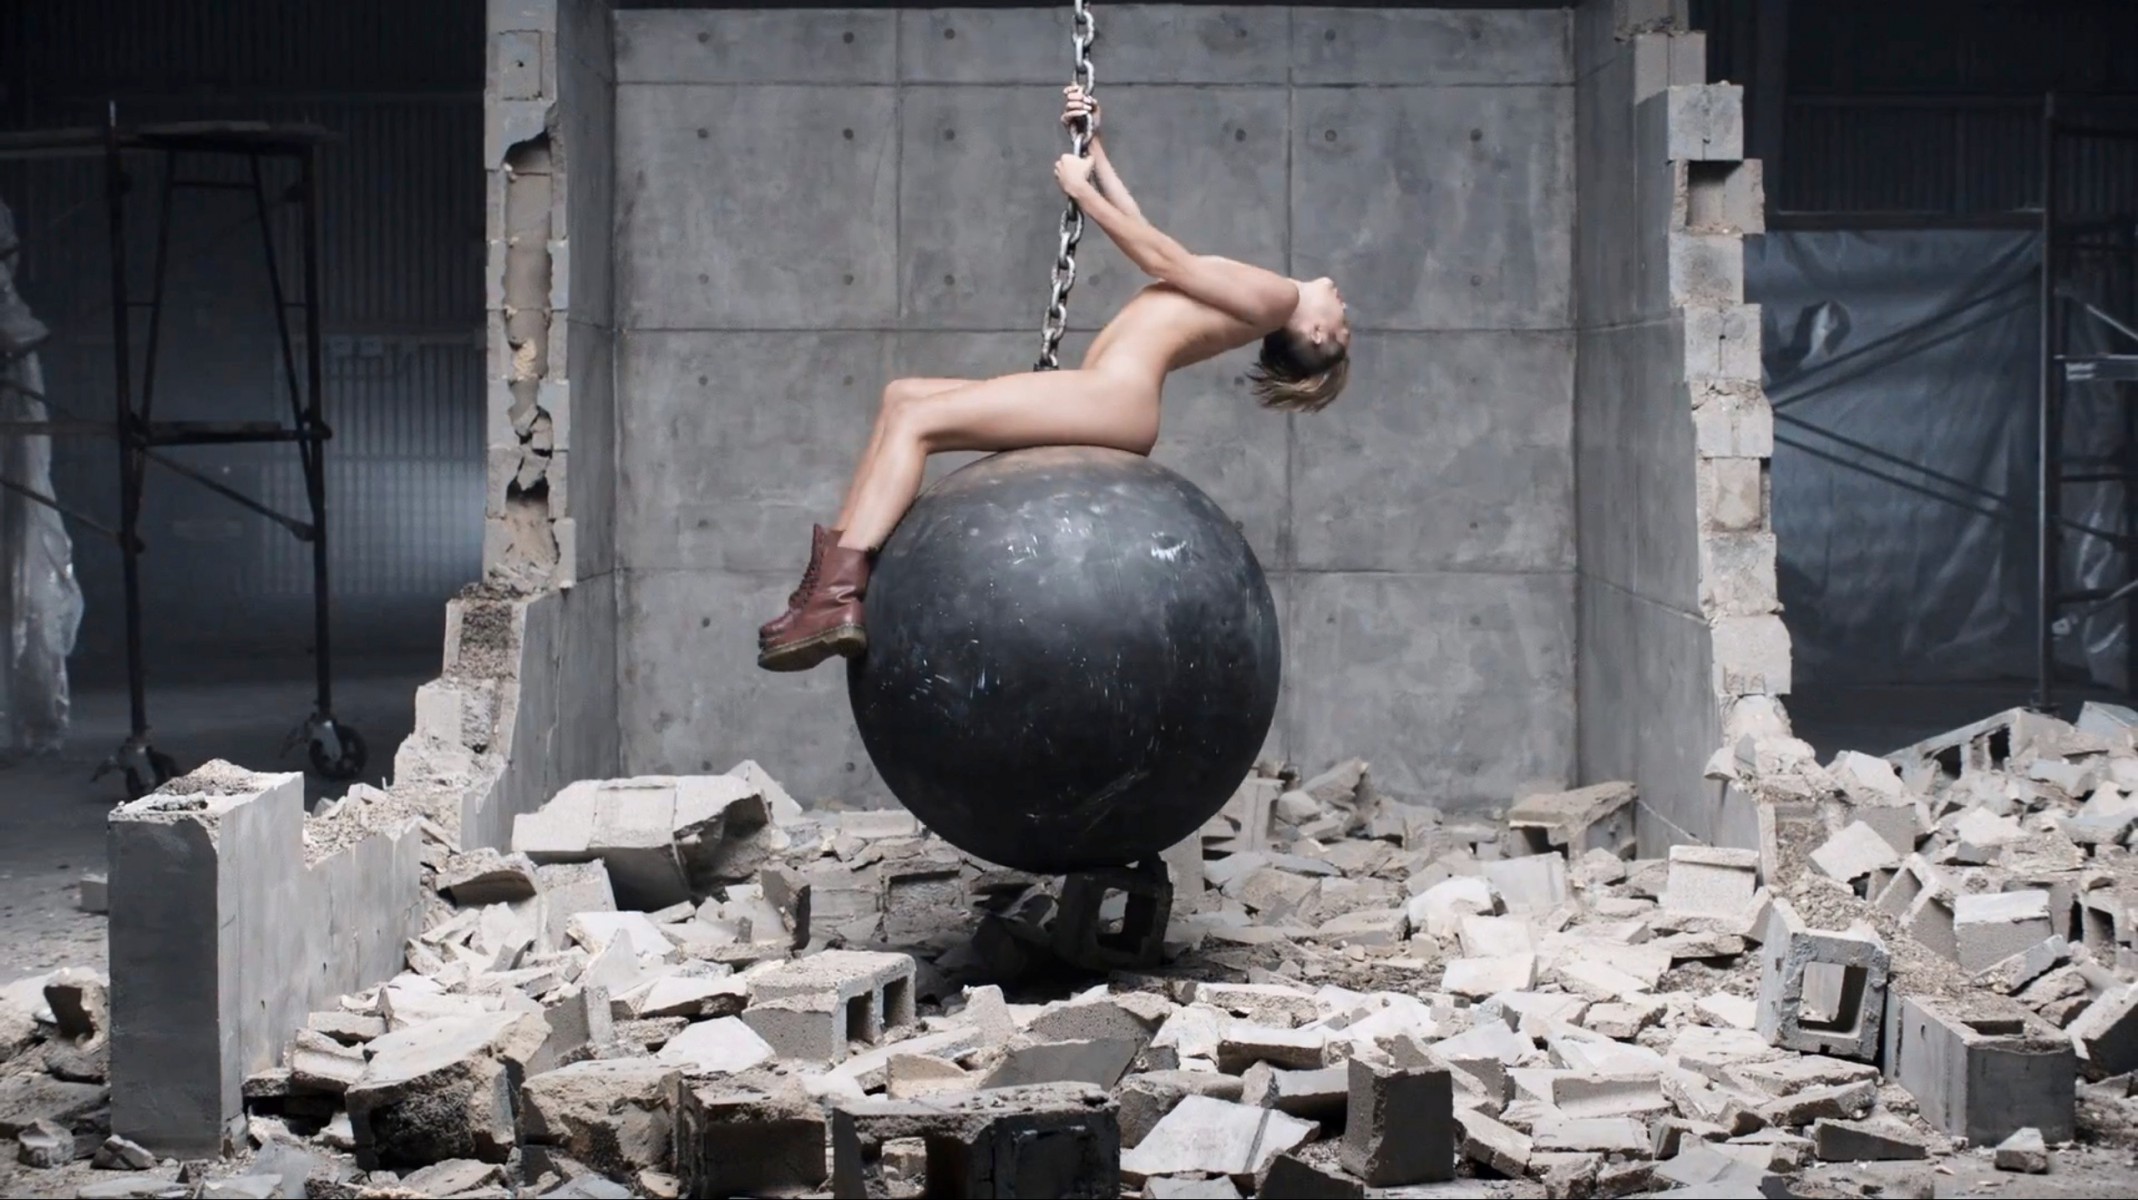 Miley Cyruss music video for Wrecking Ball became iconic